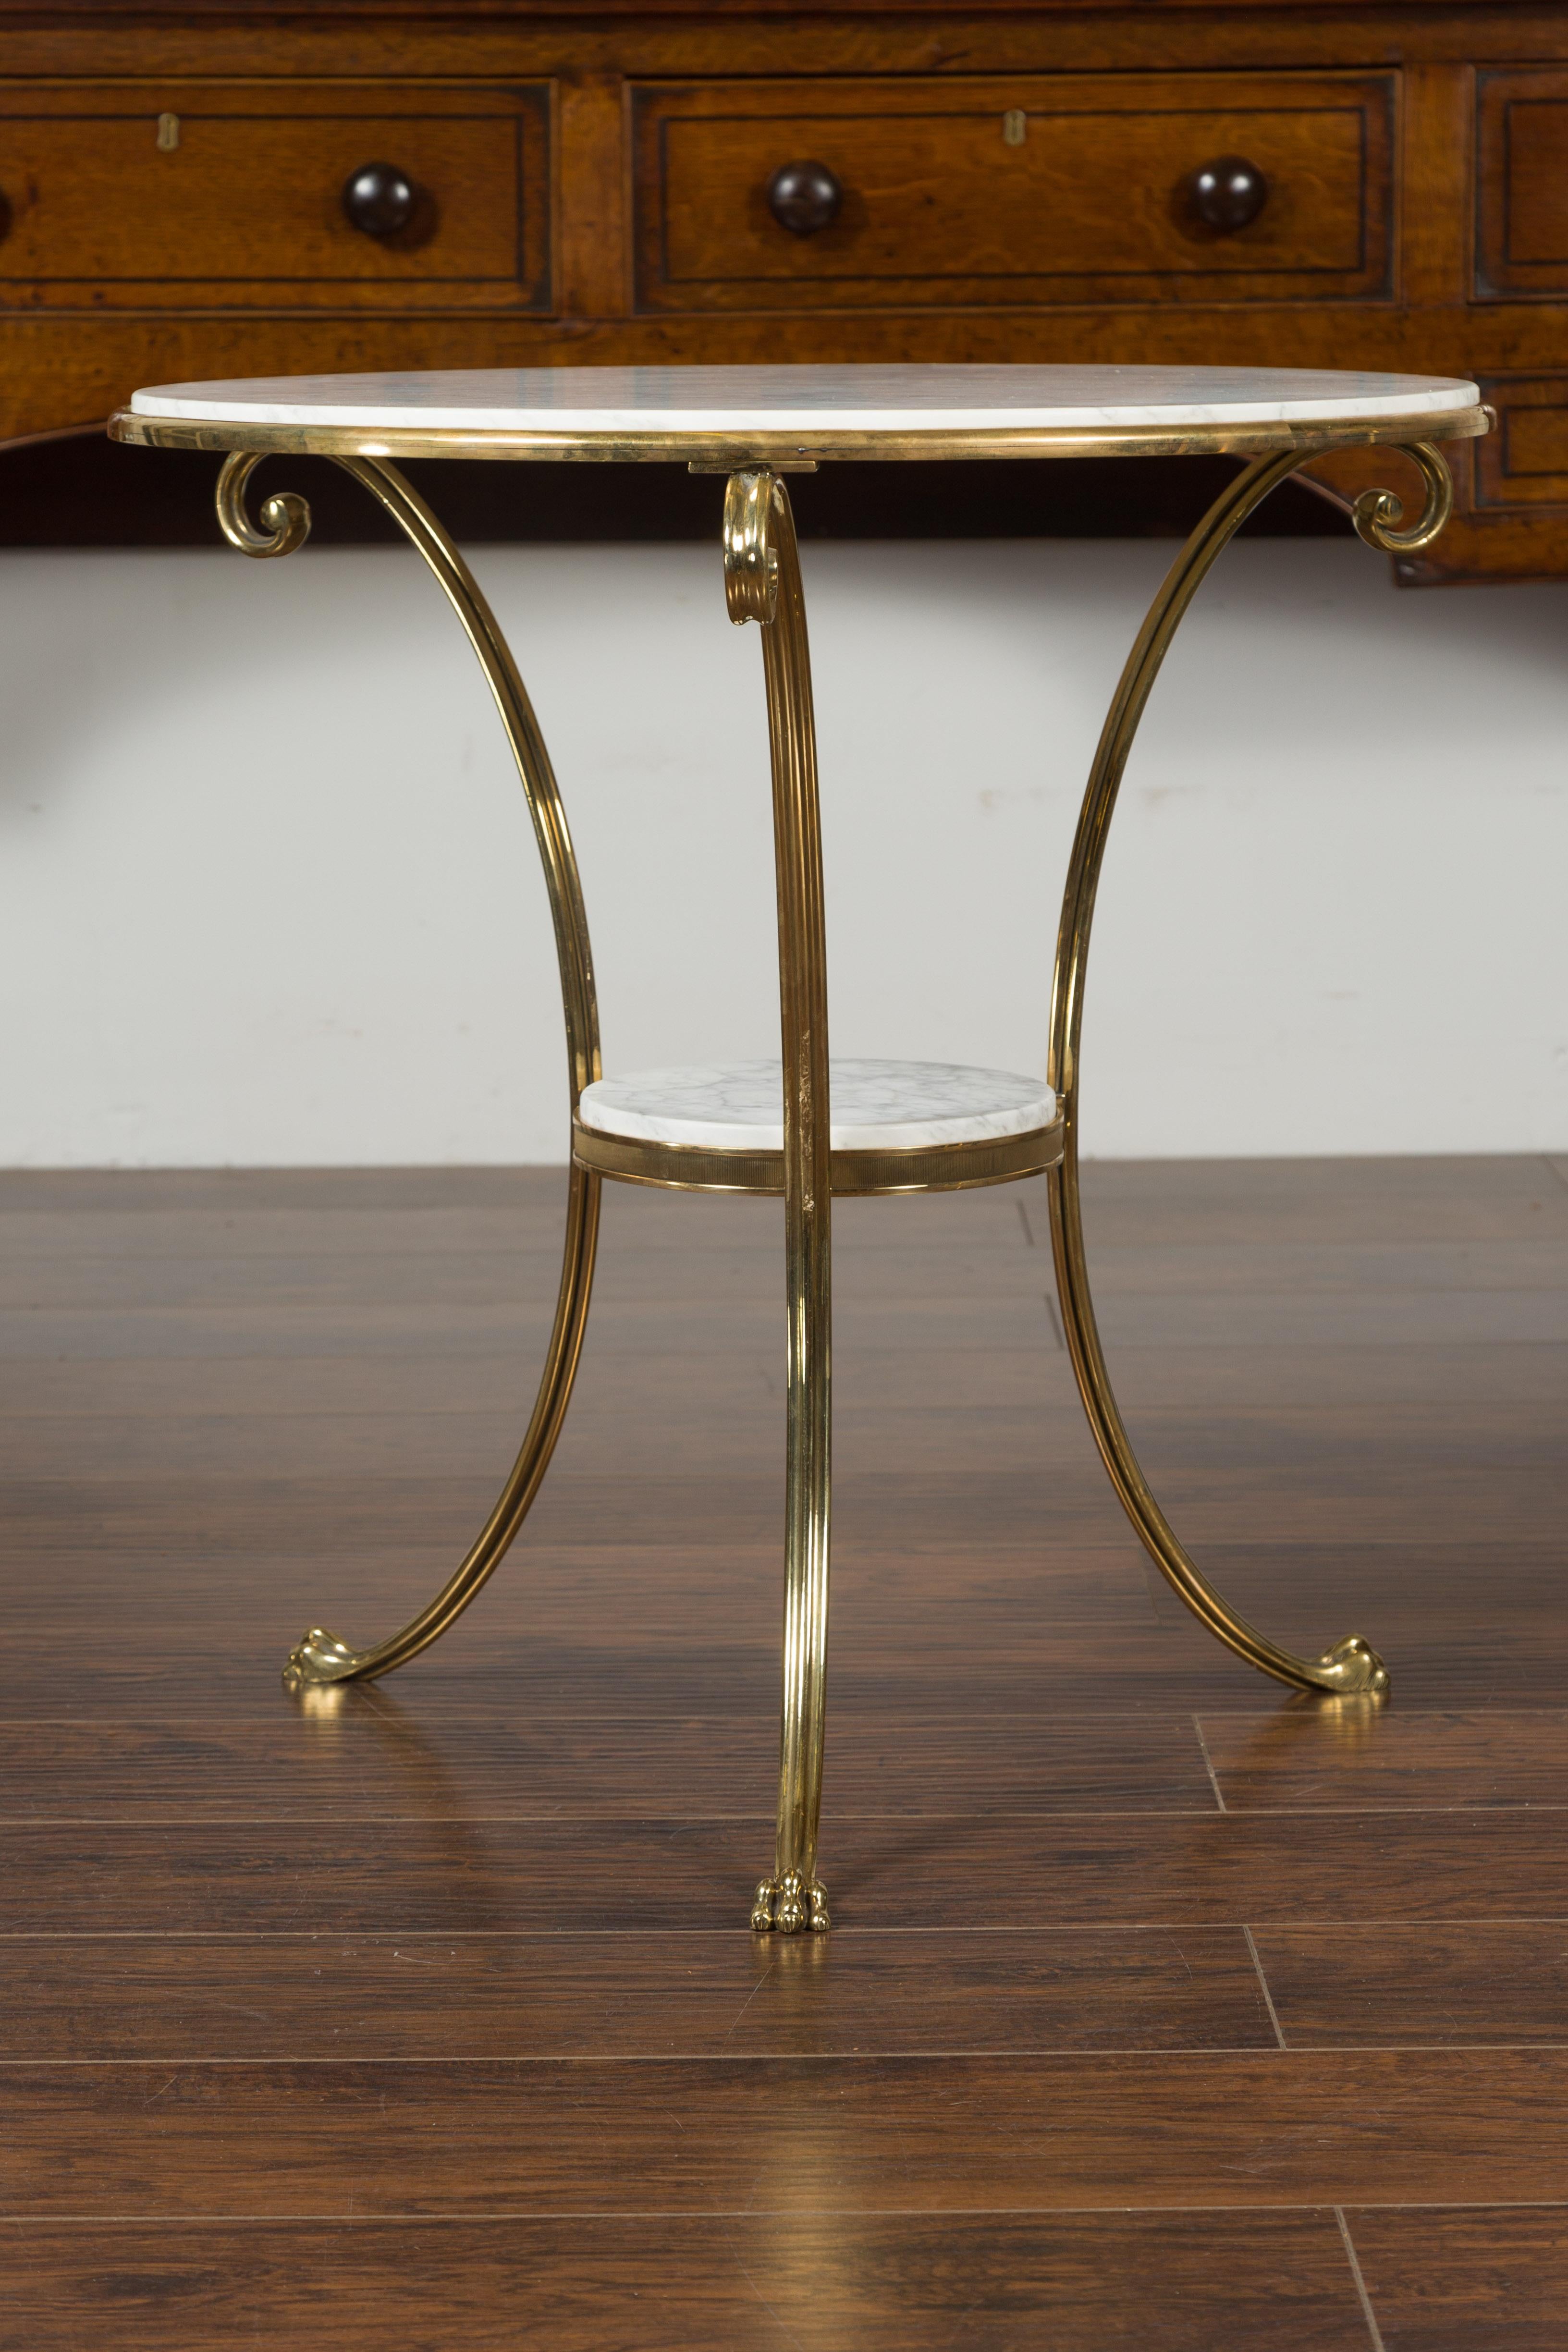 Midcentury Italian Brass Table with Round White Marble Top and Scrolling Legs 3